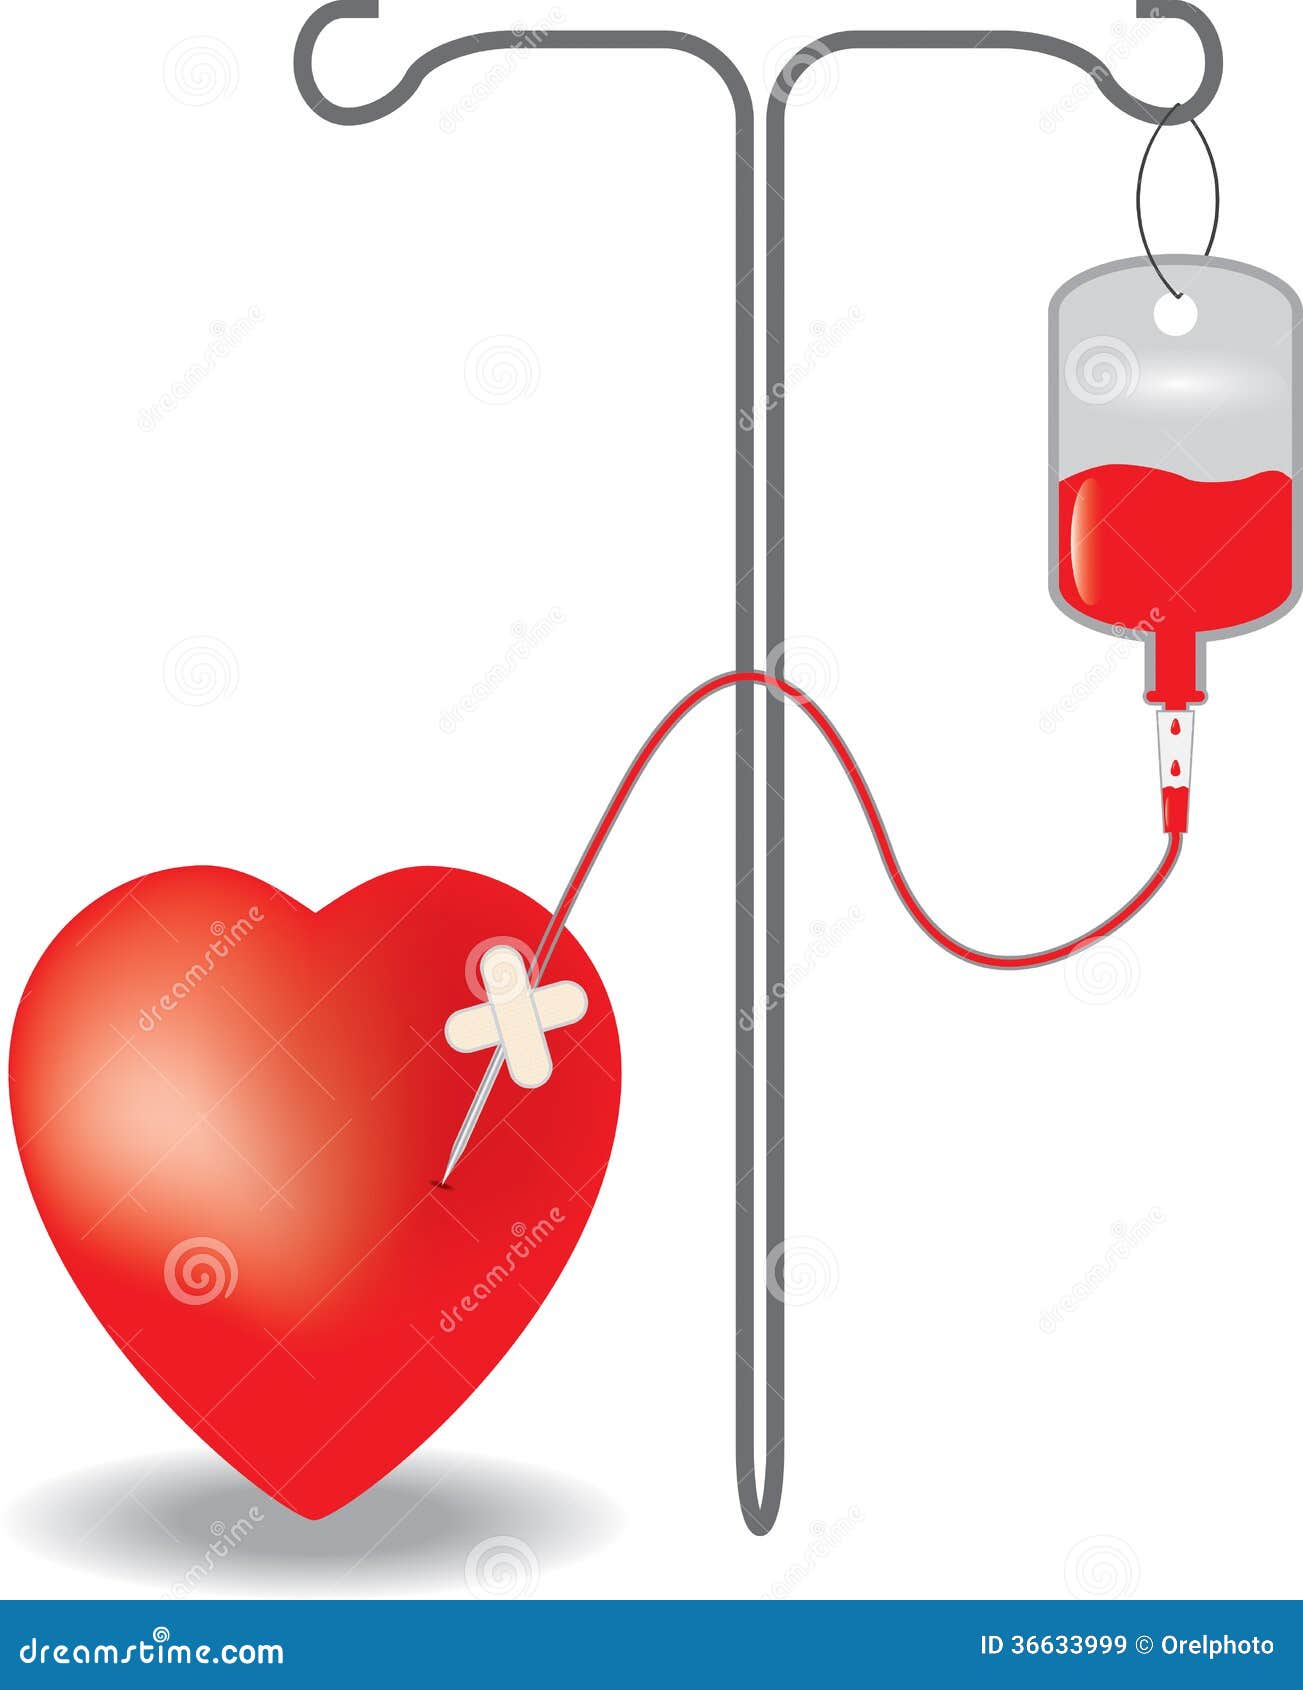 clip art images blood transfusion - photo #3